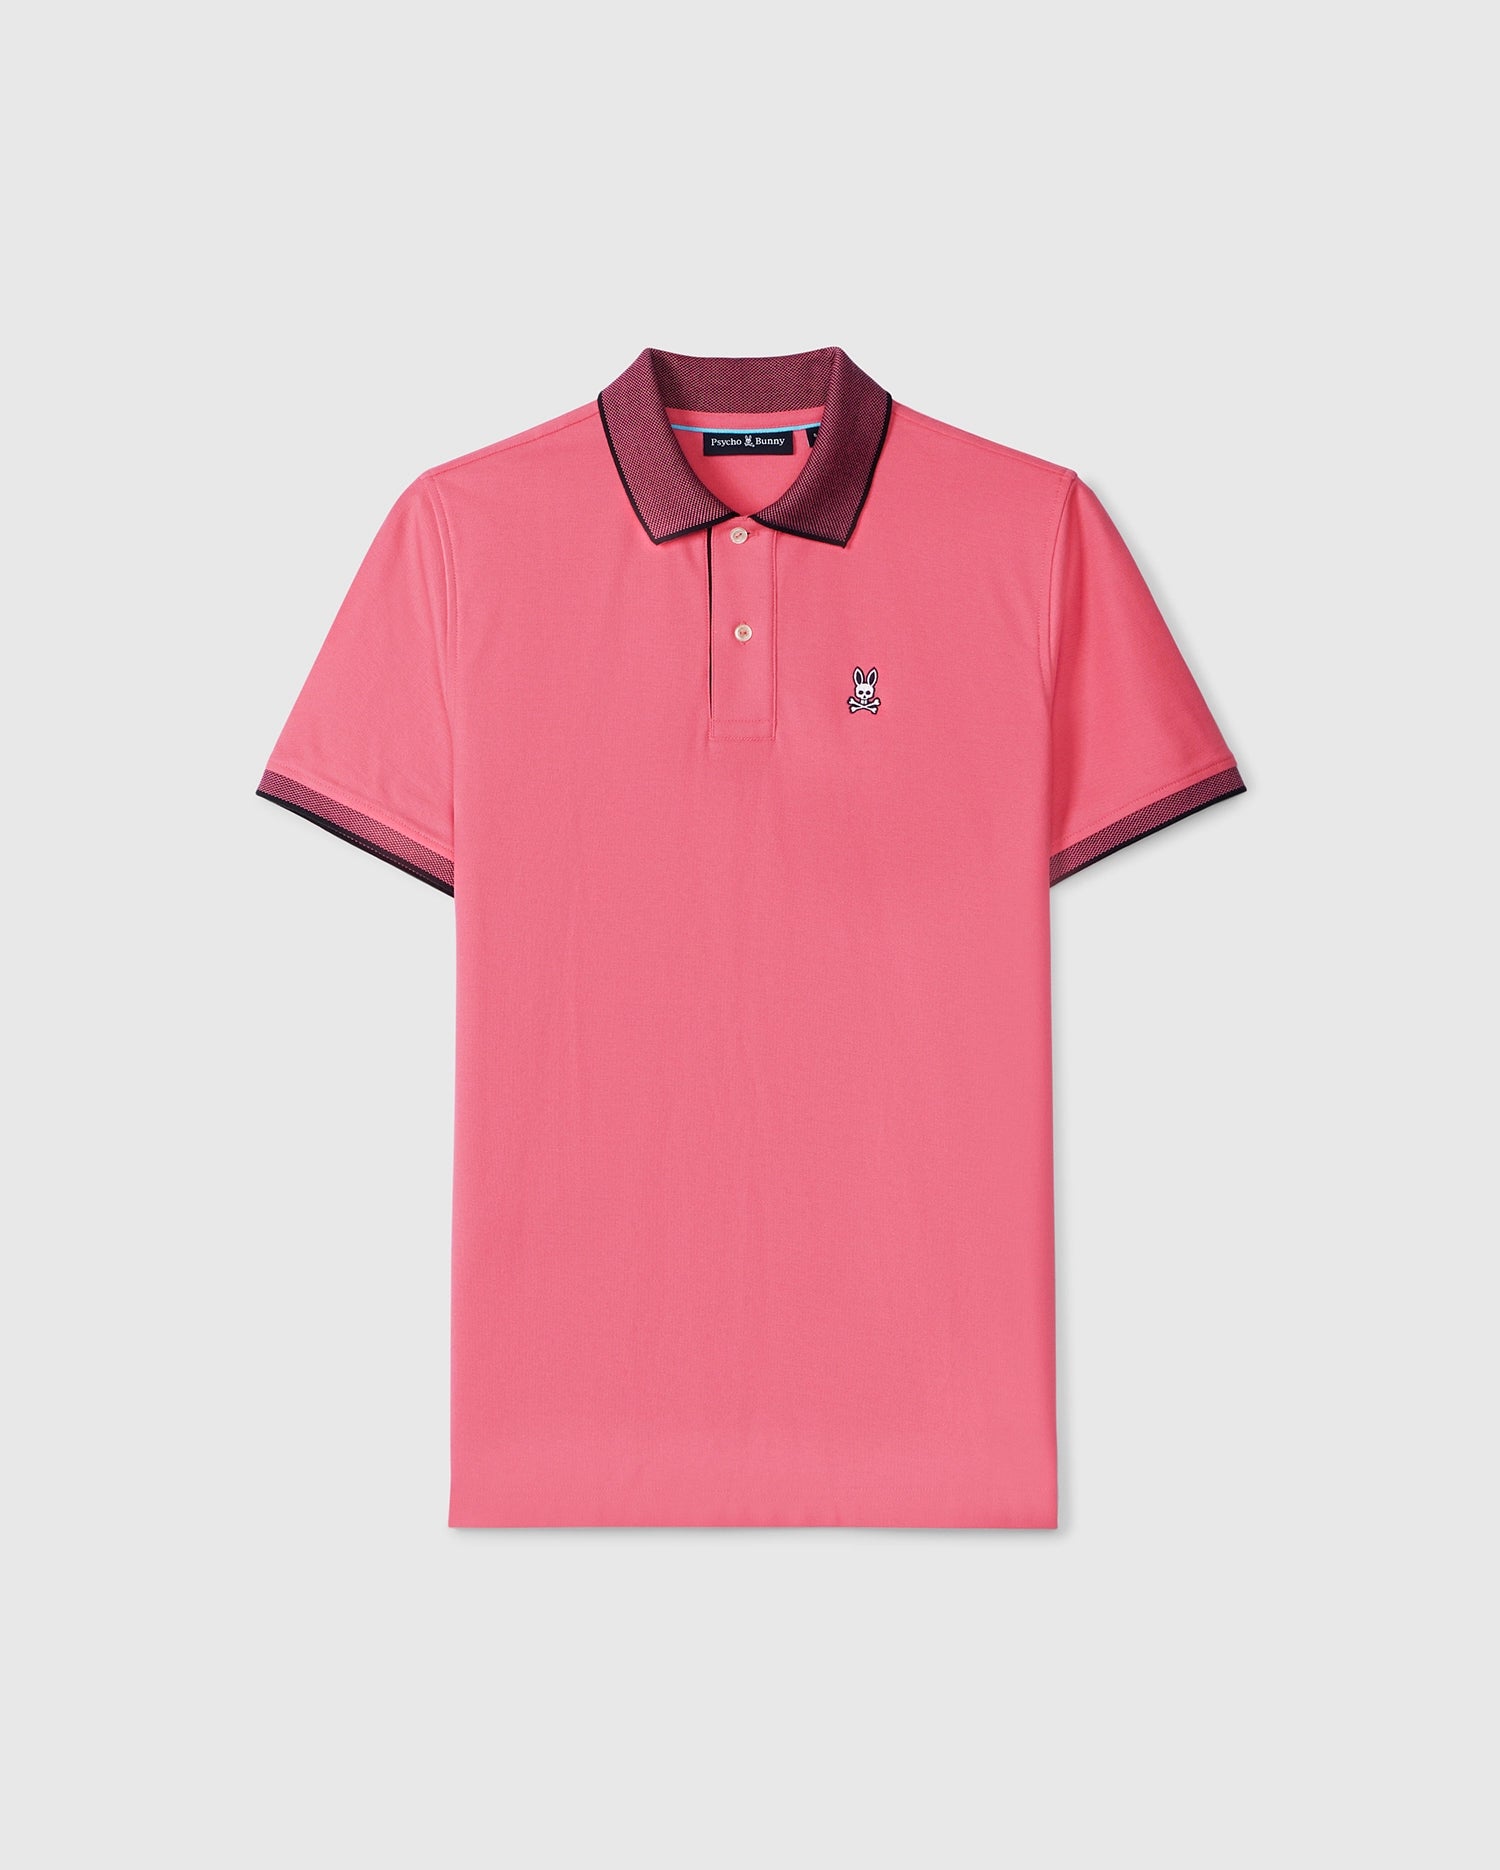 Men's Psycho Bunny pink polo shirt with black trim on the collar and sleeves, featuring a small embroidered logo on the left chest, crafted from Pima cotton piqué, displayed on a plain white background.